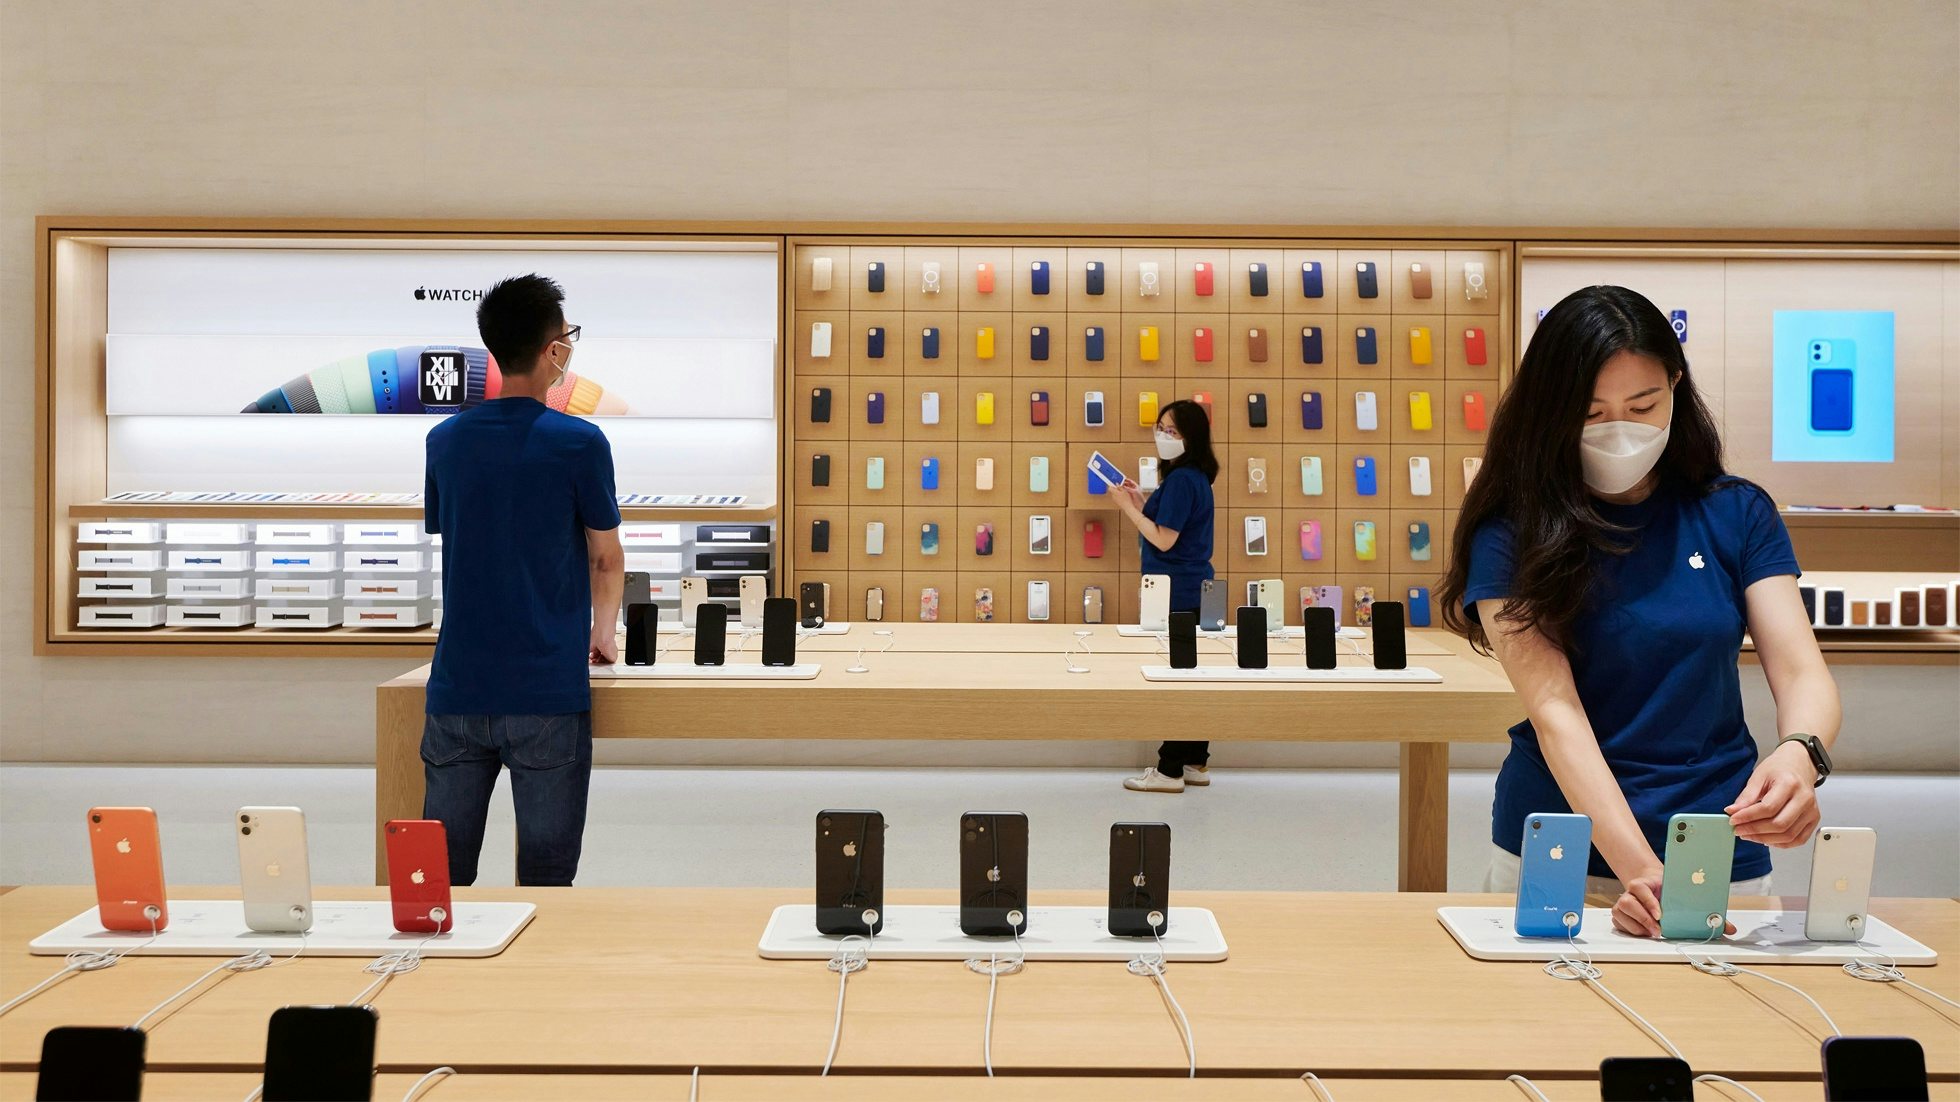 Rising incomes, dynamic lifestyle aspirations, and high consumer confidence have helped boost the China market. But there’s another emerging factor: consumer credit. Photo: Courtesy of Apple